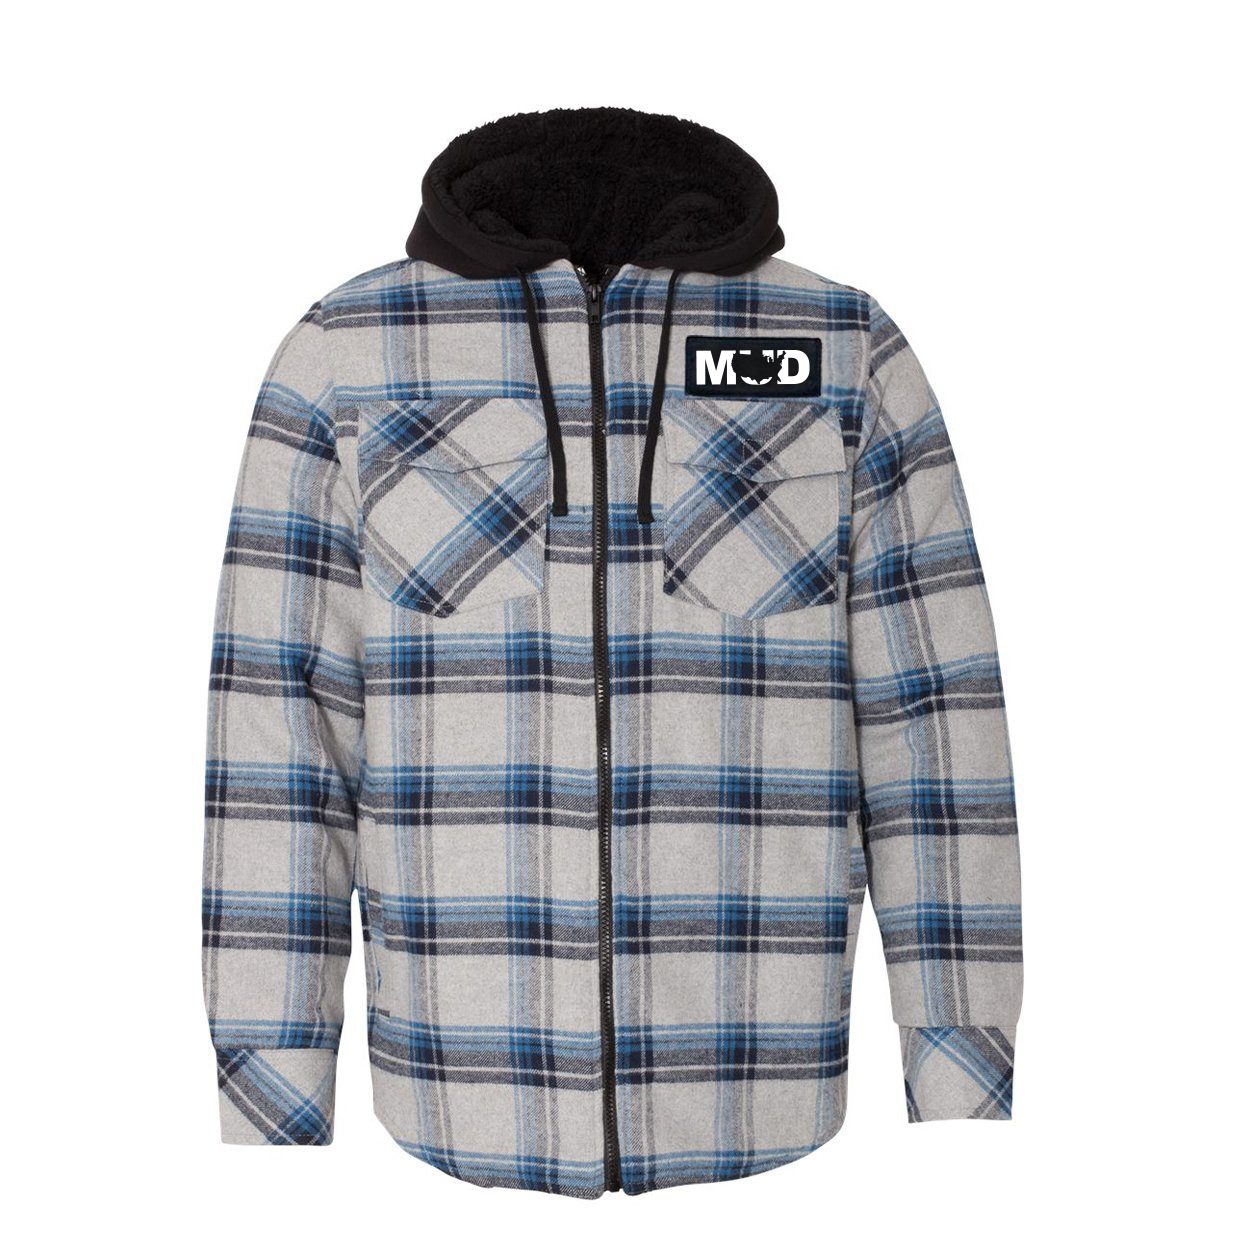 Mud United States Classic Unisex Full Zip Woven Patch Hooded Flannel Jacket Gray/ Blue (White Logo)